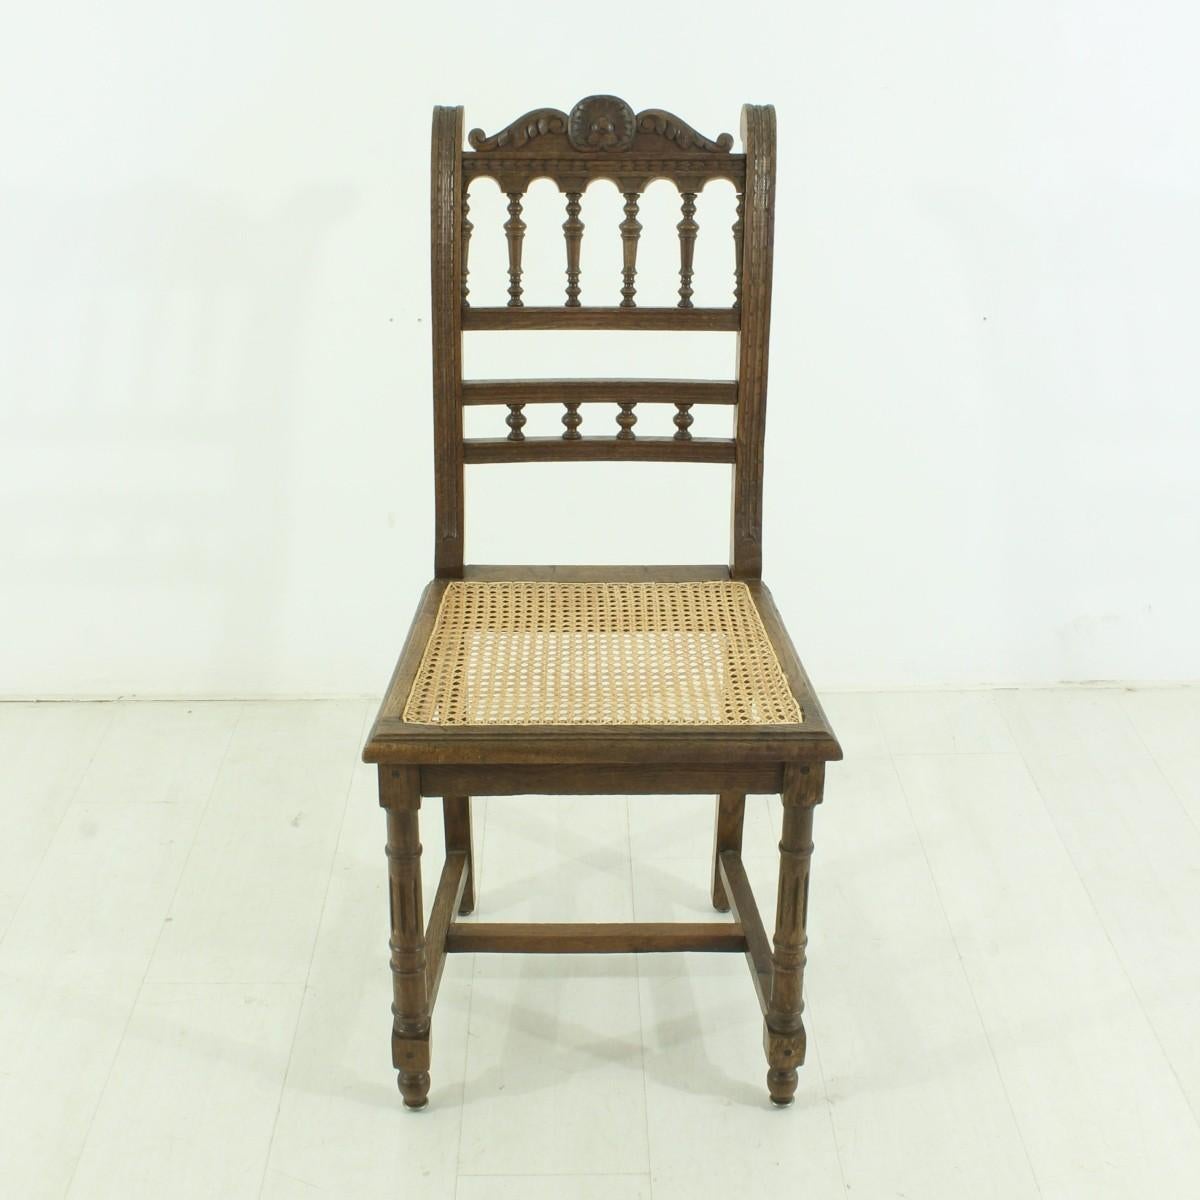 Measures: Seat height 46cm
Material: Solid oak
Wickerwork, floral ornamentation
According to age very good working condition.